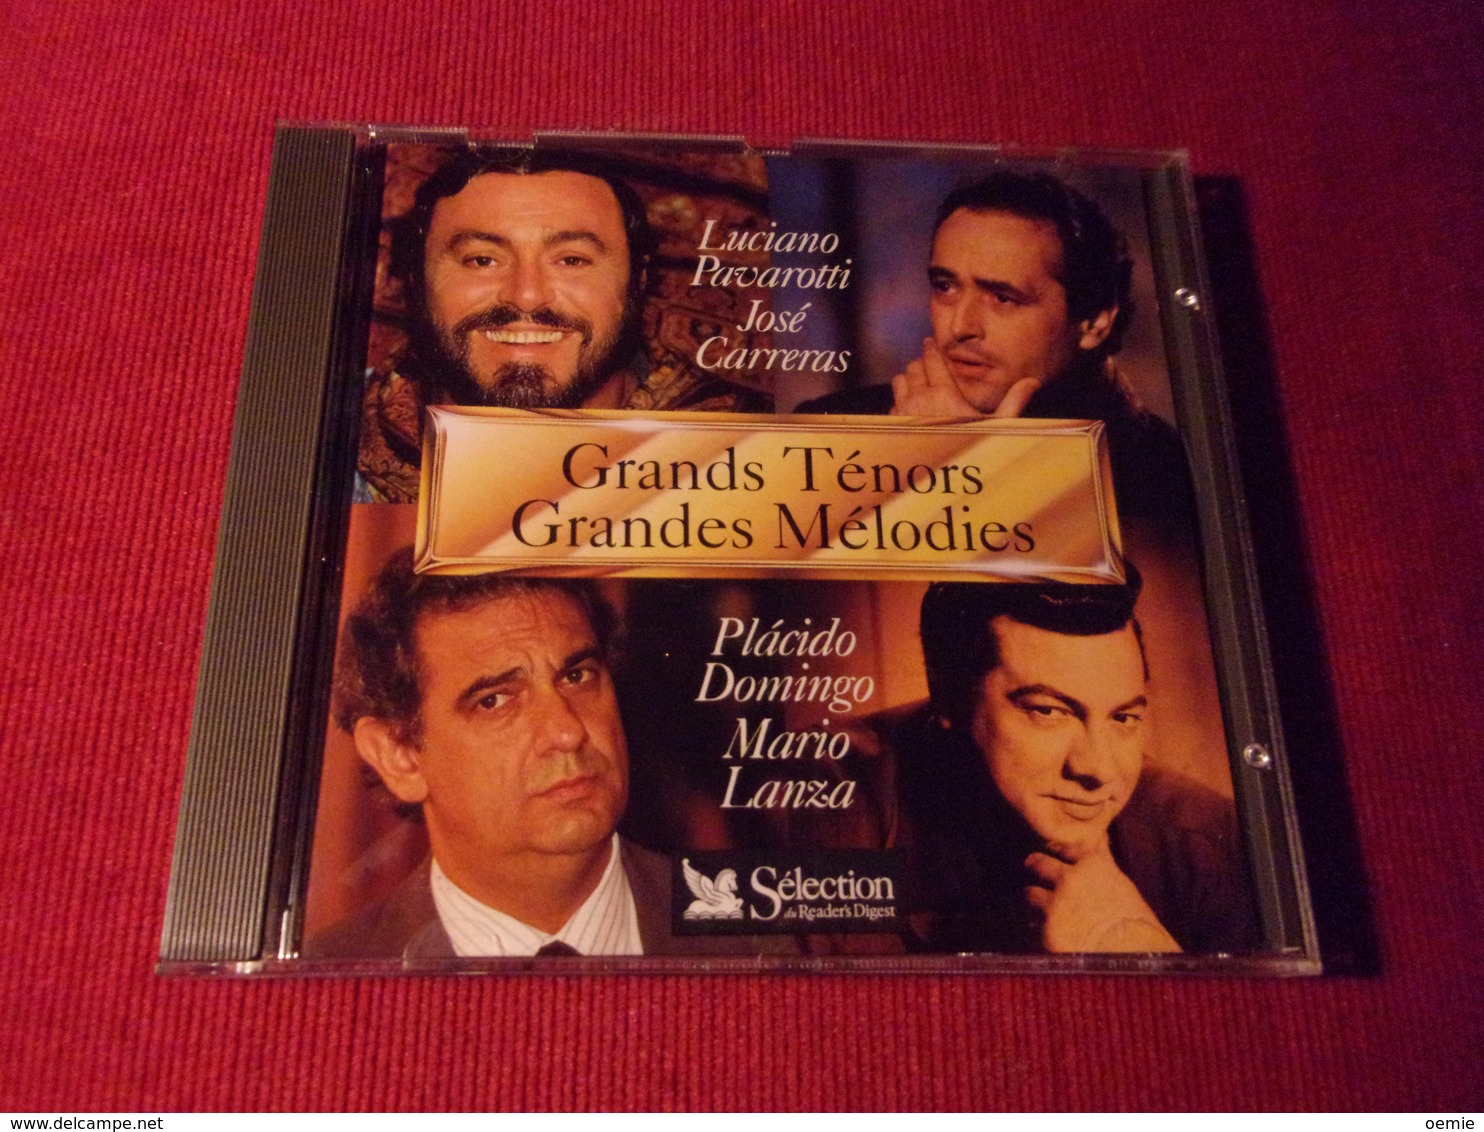 SELECTION DU READER'S DIGEST  °° LES GRANDS TENORS GRANDES LUCIANO PAVAROTTI  CD DUREE TOTALES 67 Mn 01 - Opera